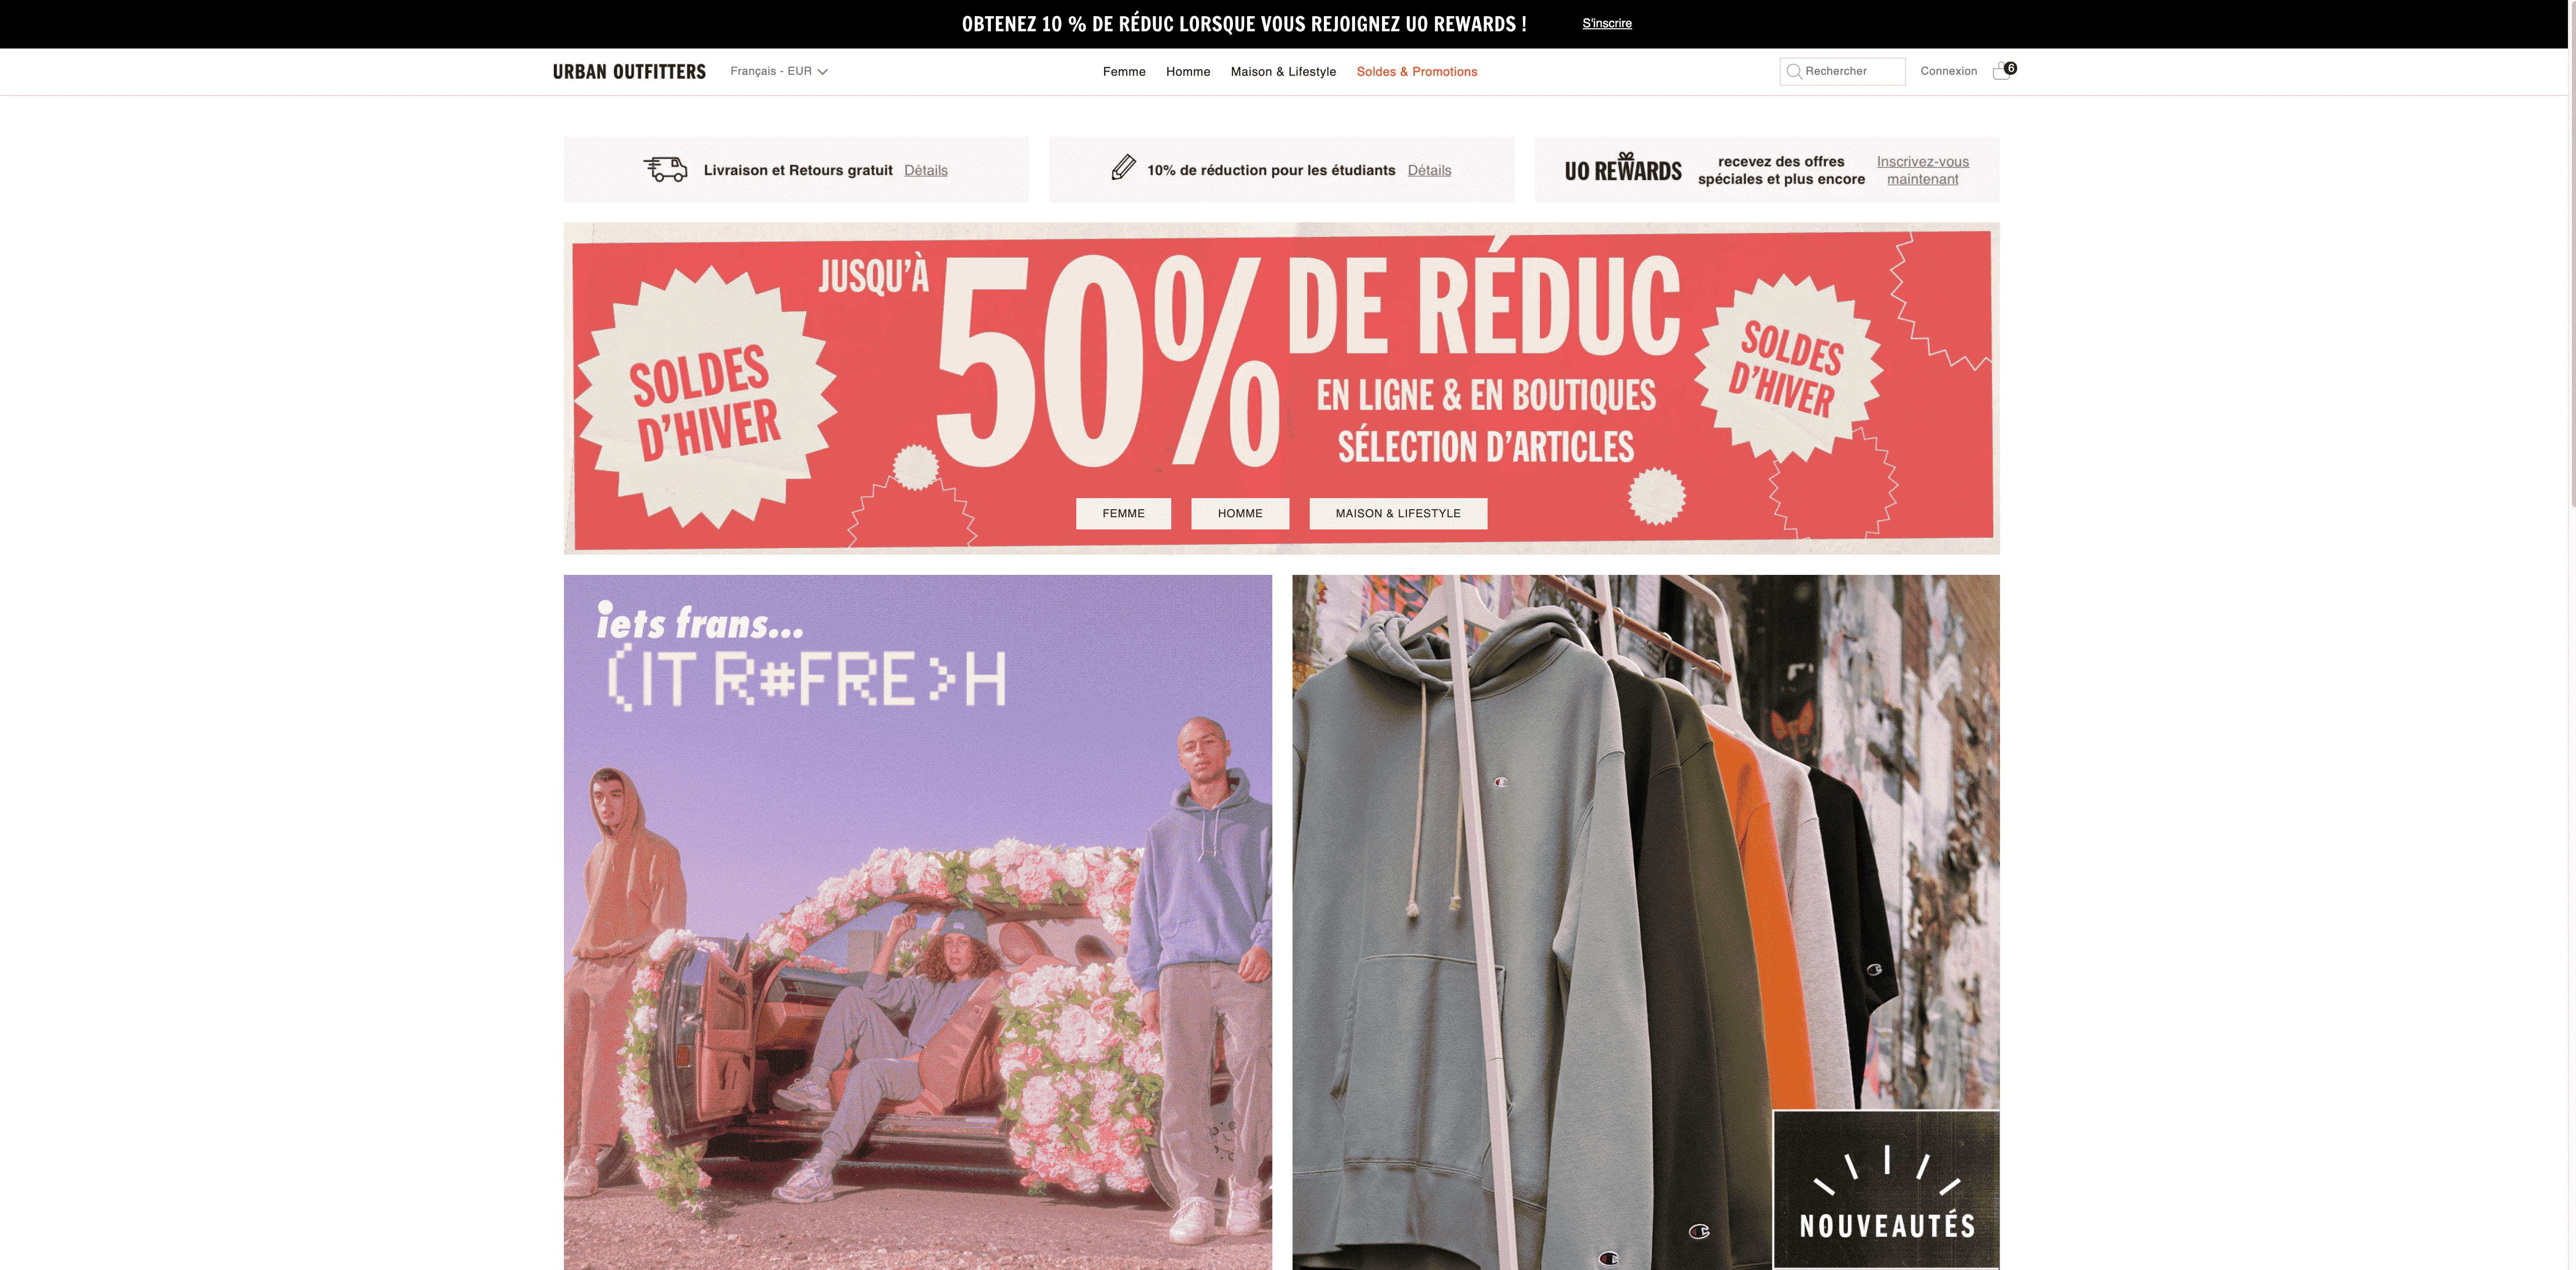 urband-outfitters-soldes,-promotions